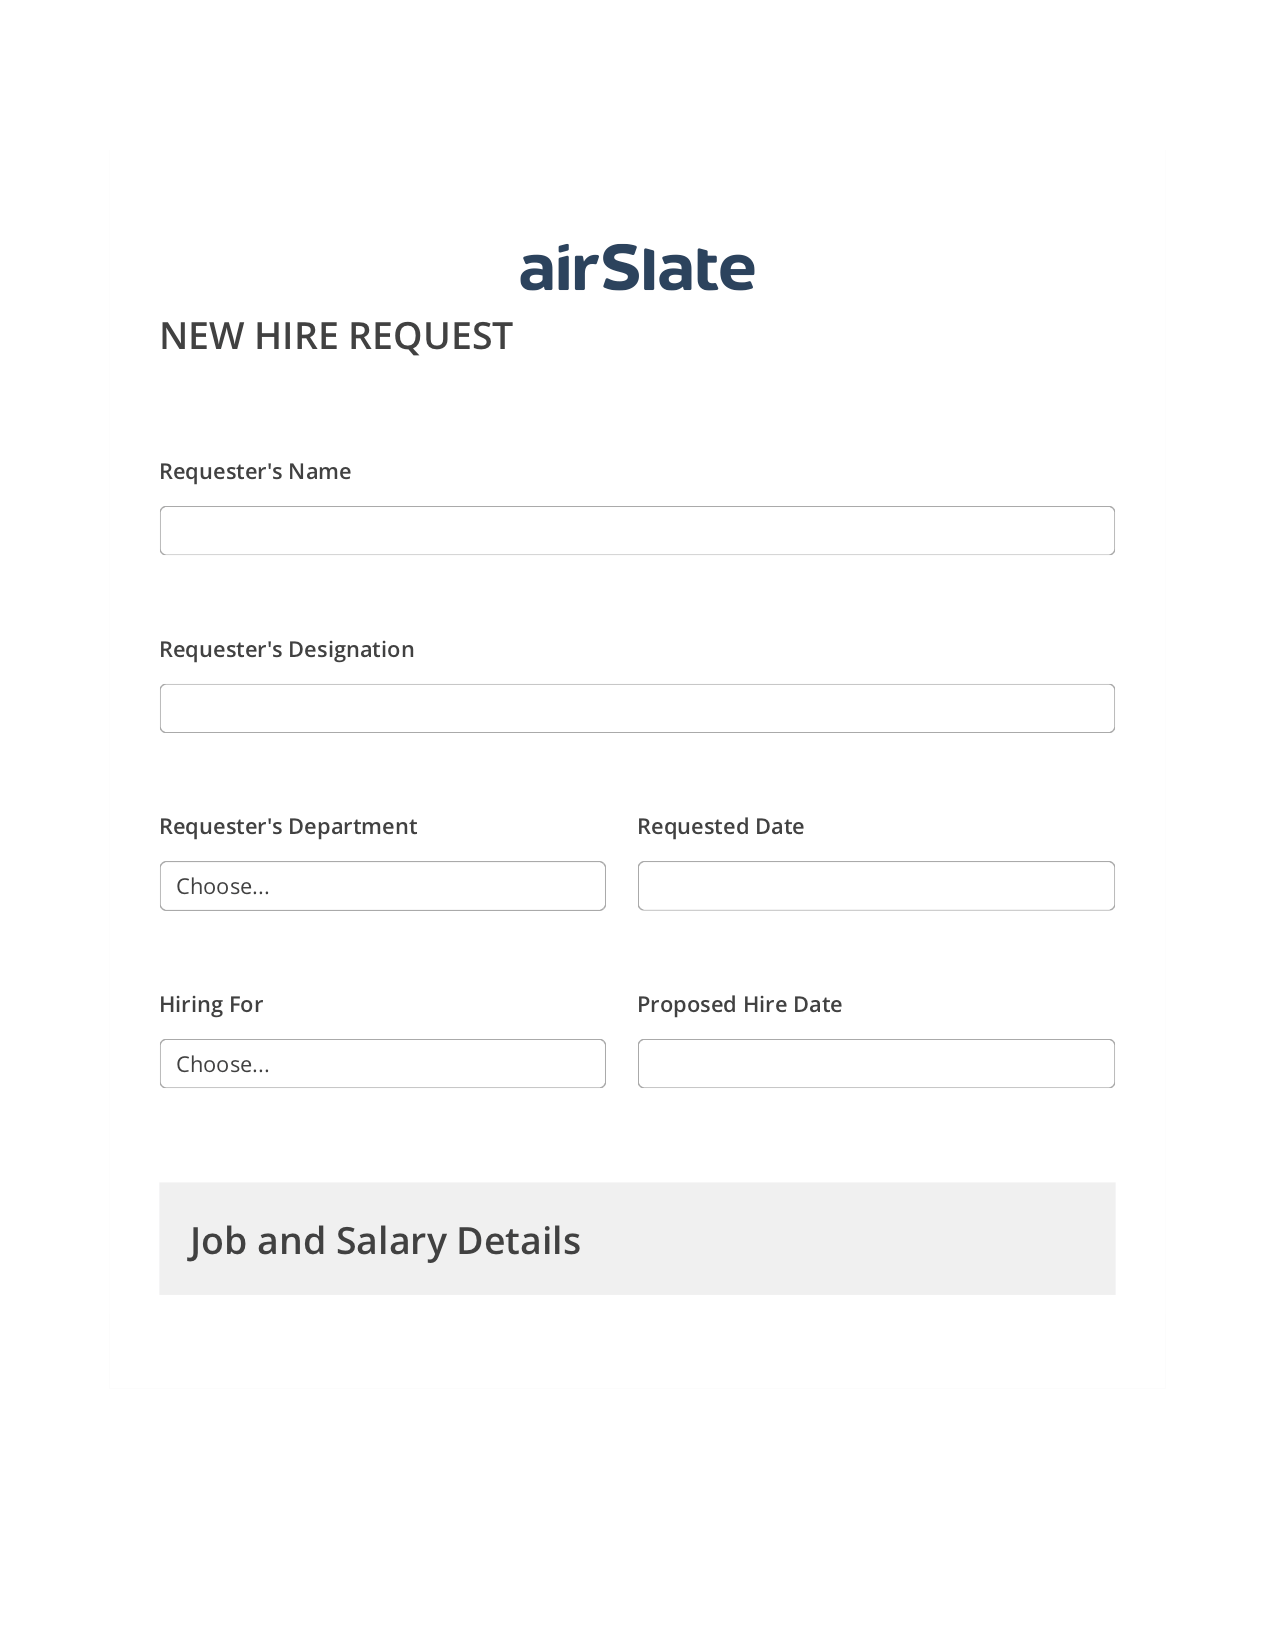 Hiring Request Workflow Pre-fill from Litmos bot, Remove Tags From Slate Bot, Export to WebMerge Bot